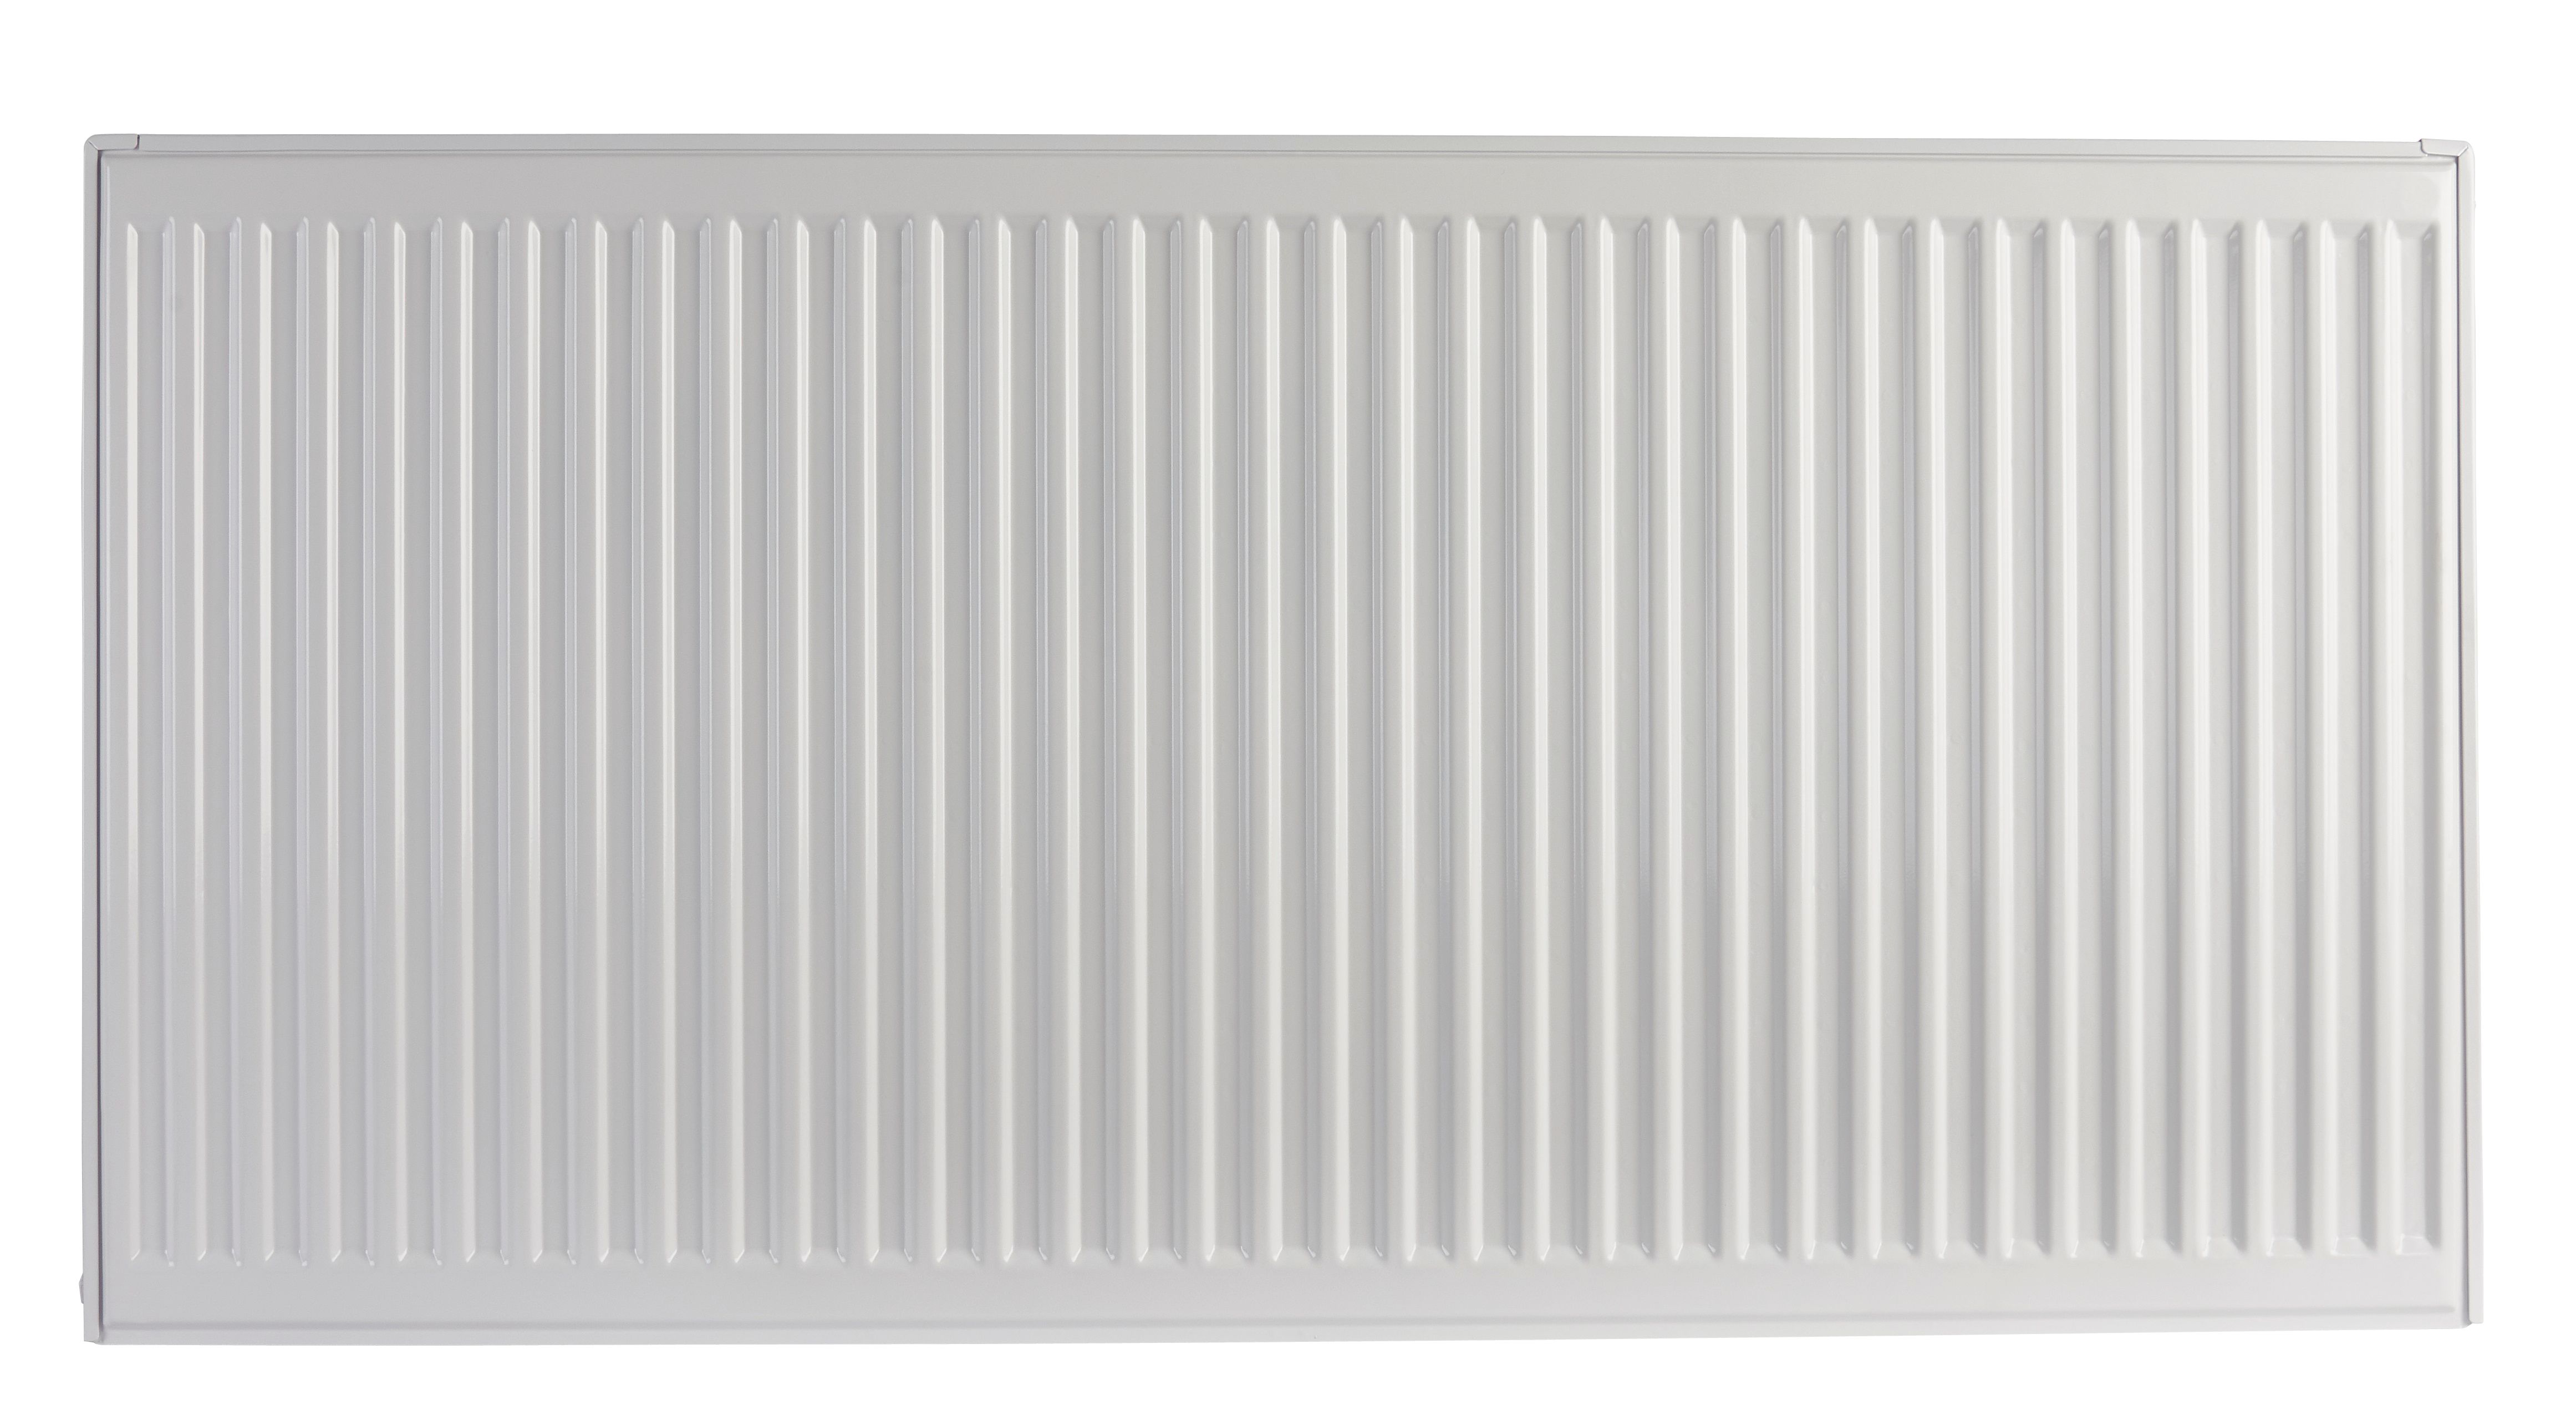 Image of Homeline by Stelrad 700 x 1400mm Type 22 Double Panel Premium Double Convector Radiator